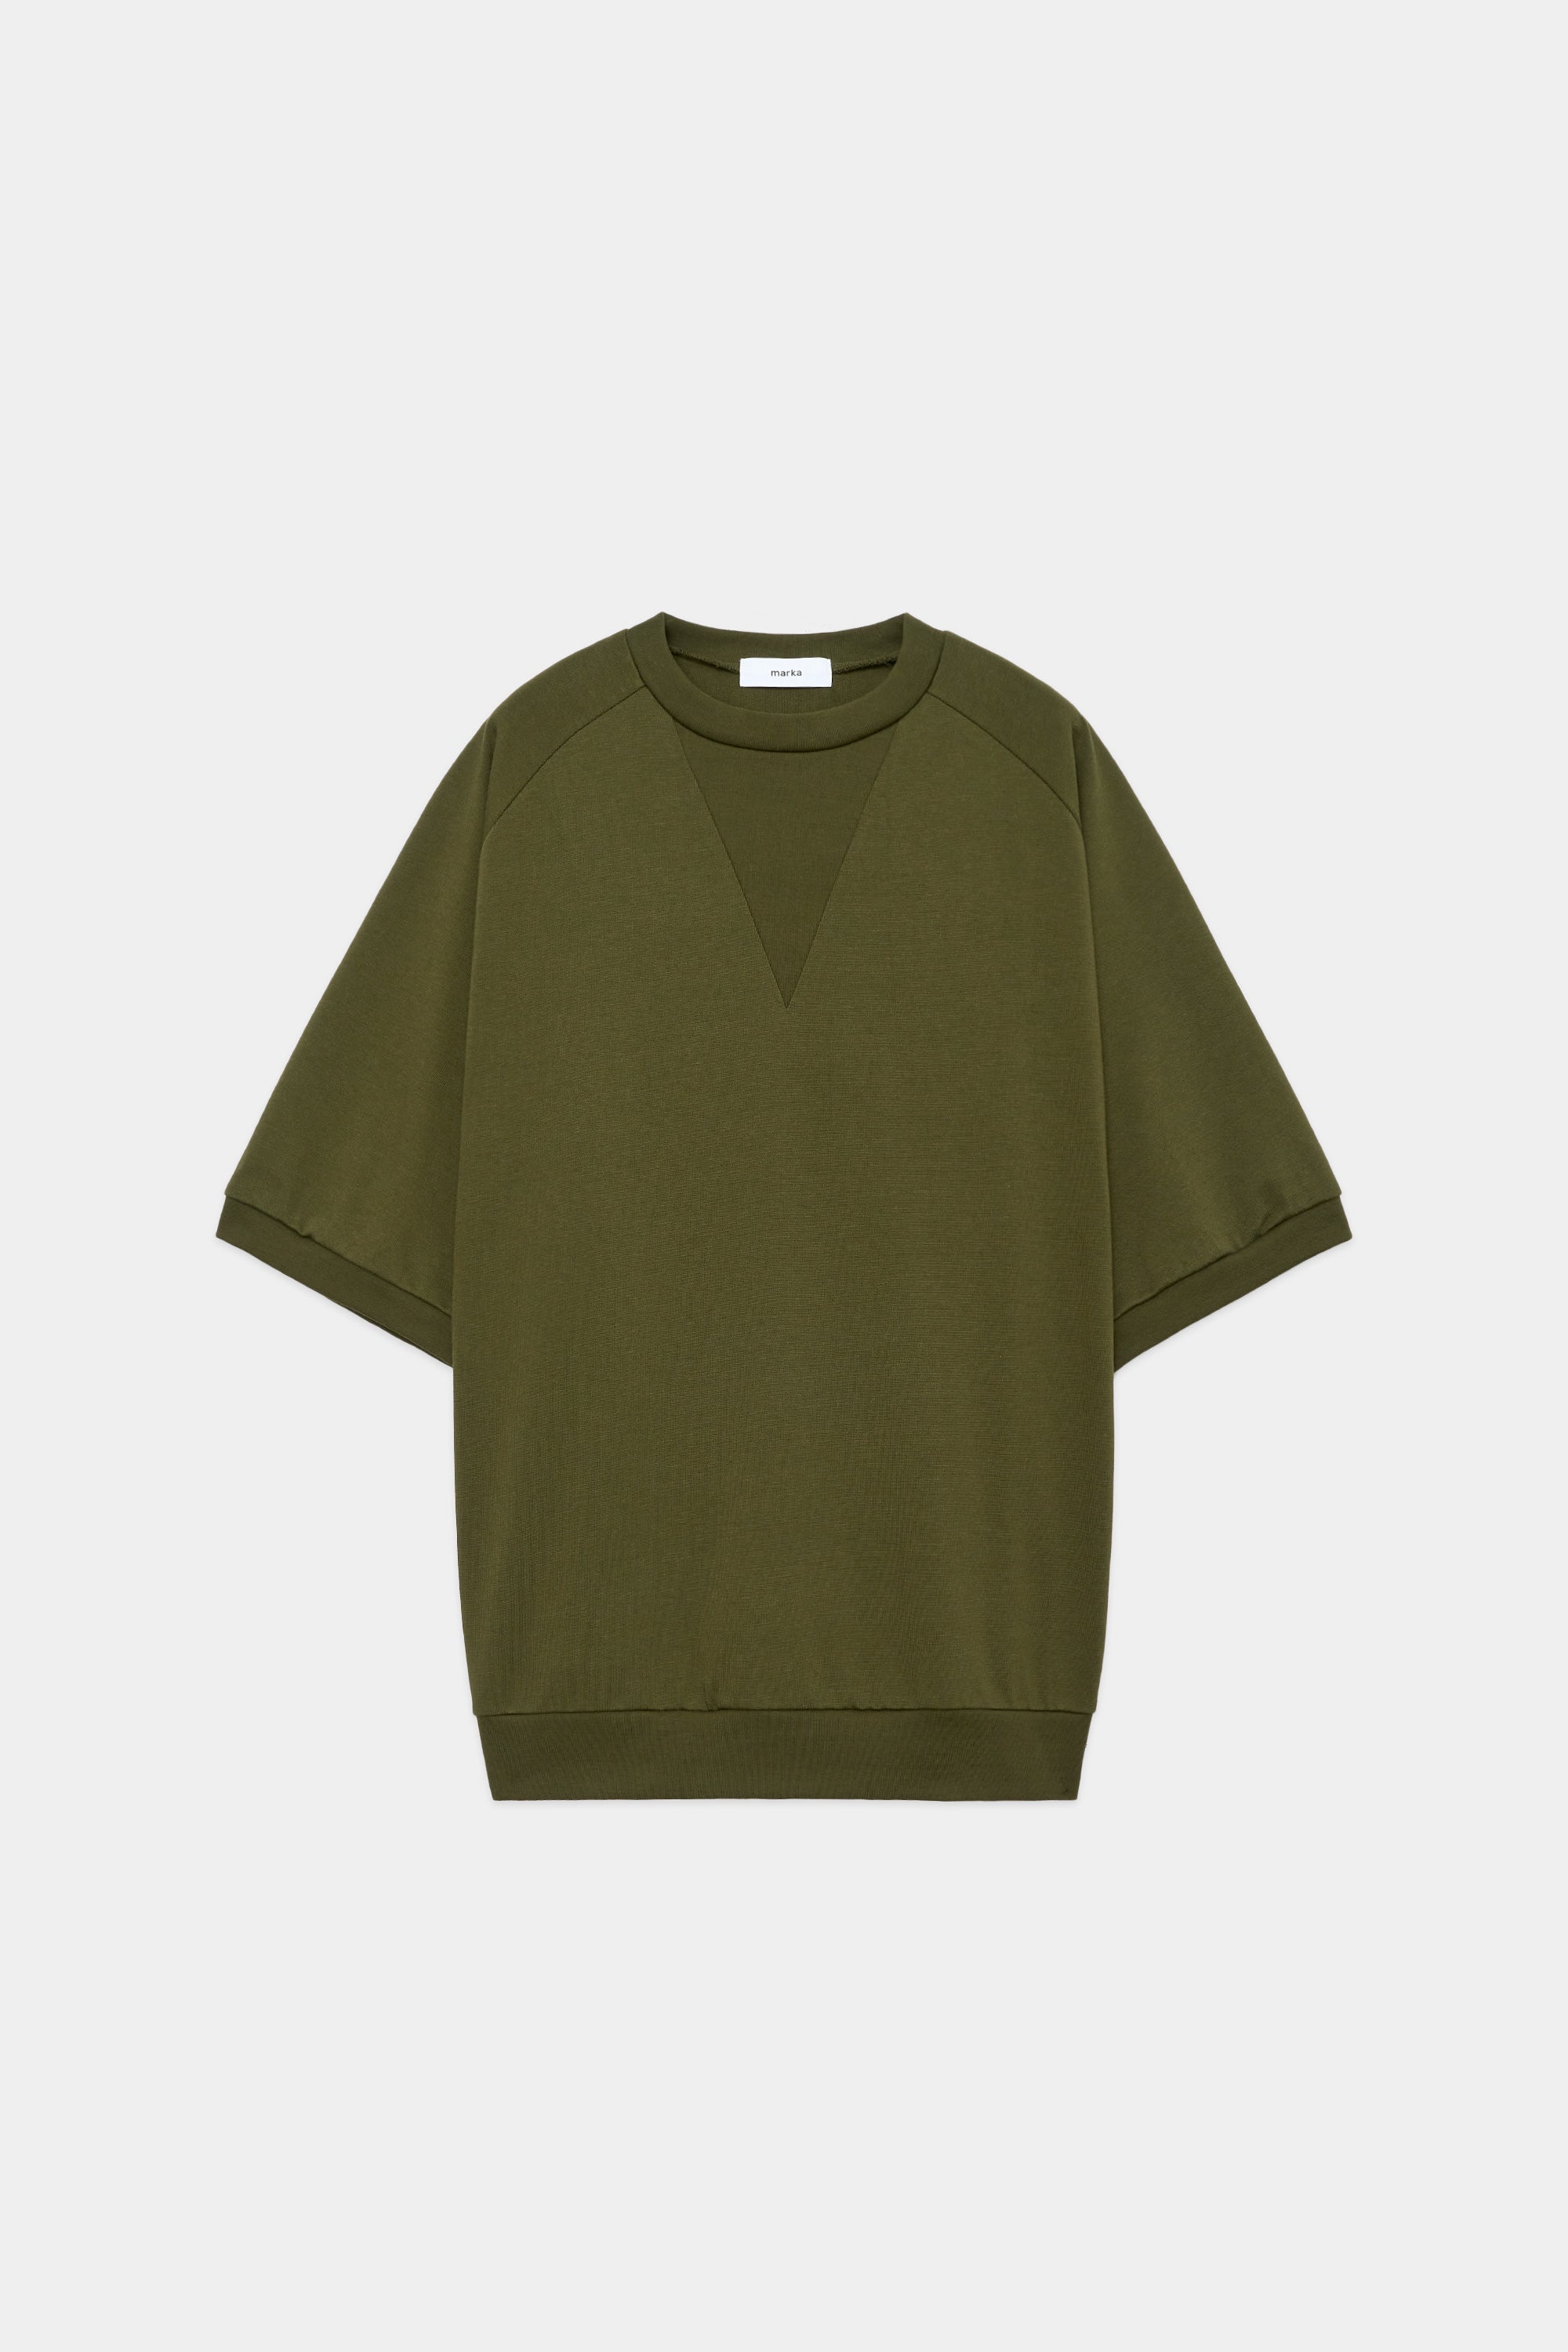 20//1 RECYCLE SUVIN ORGANIC COTTON KNIT V GUSSET CREW NECK, Olive